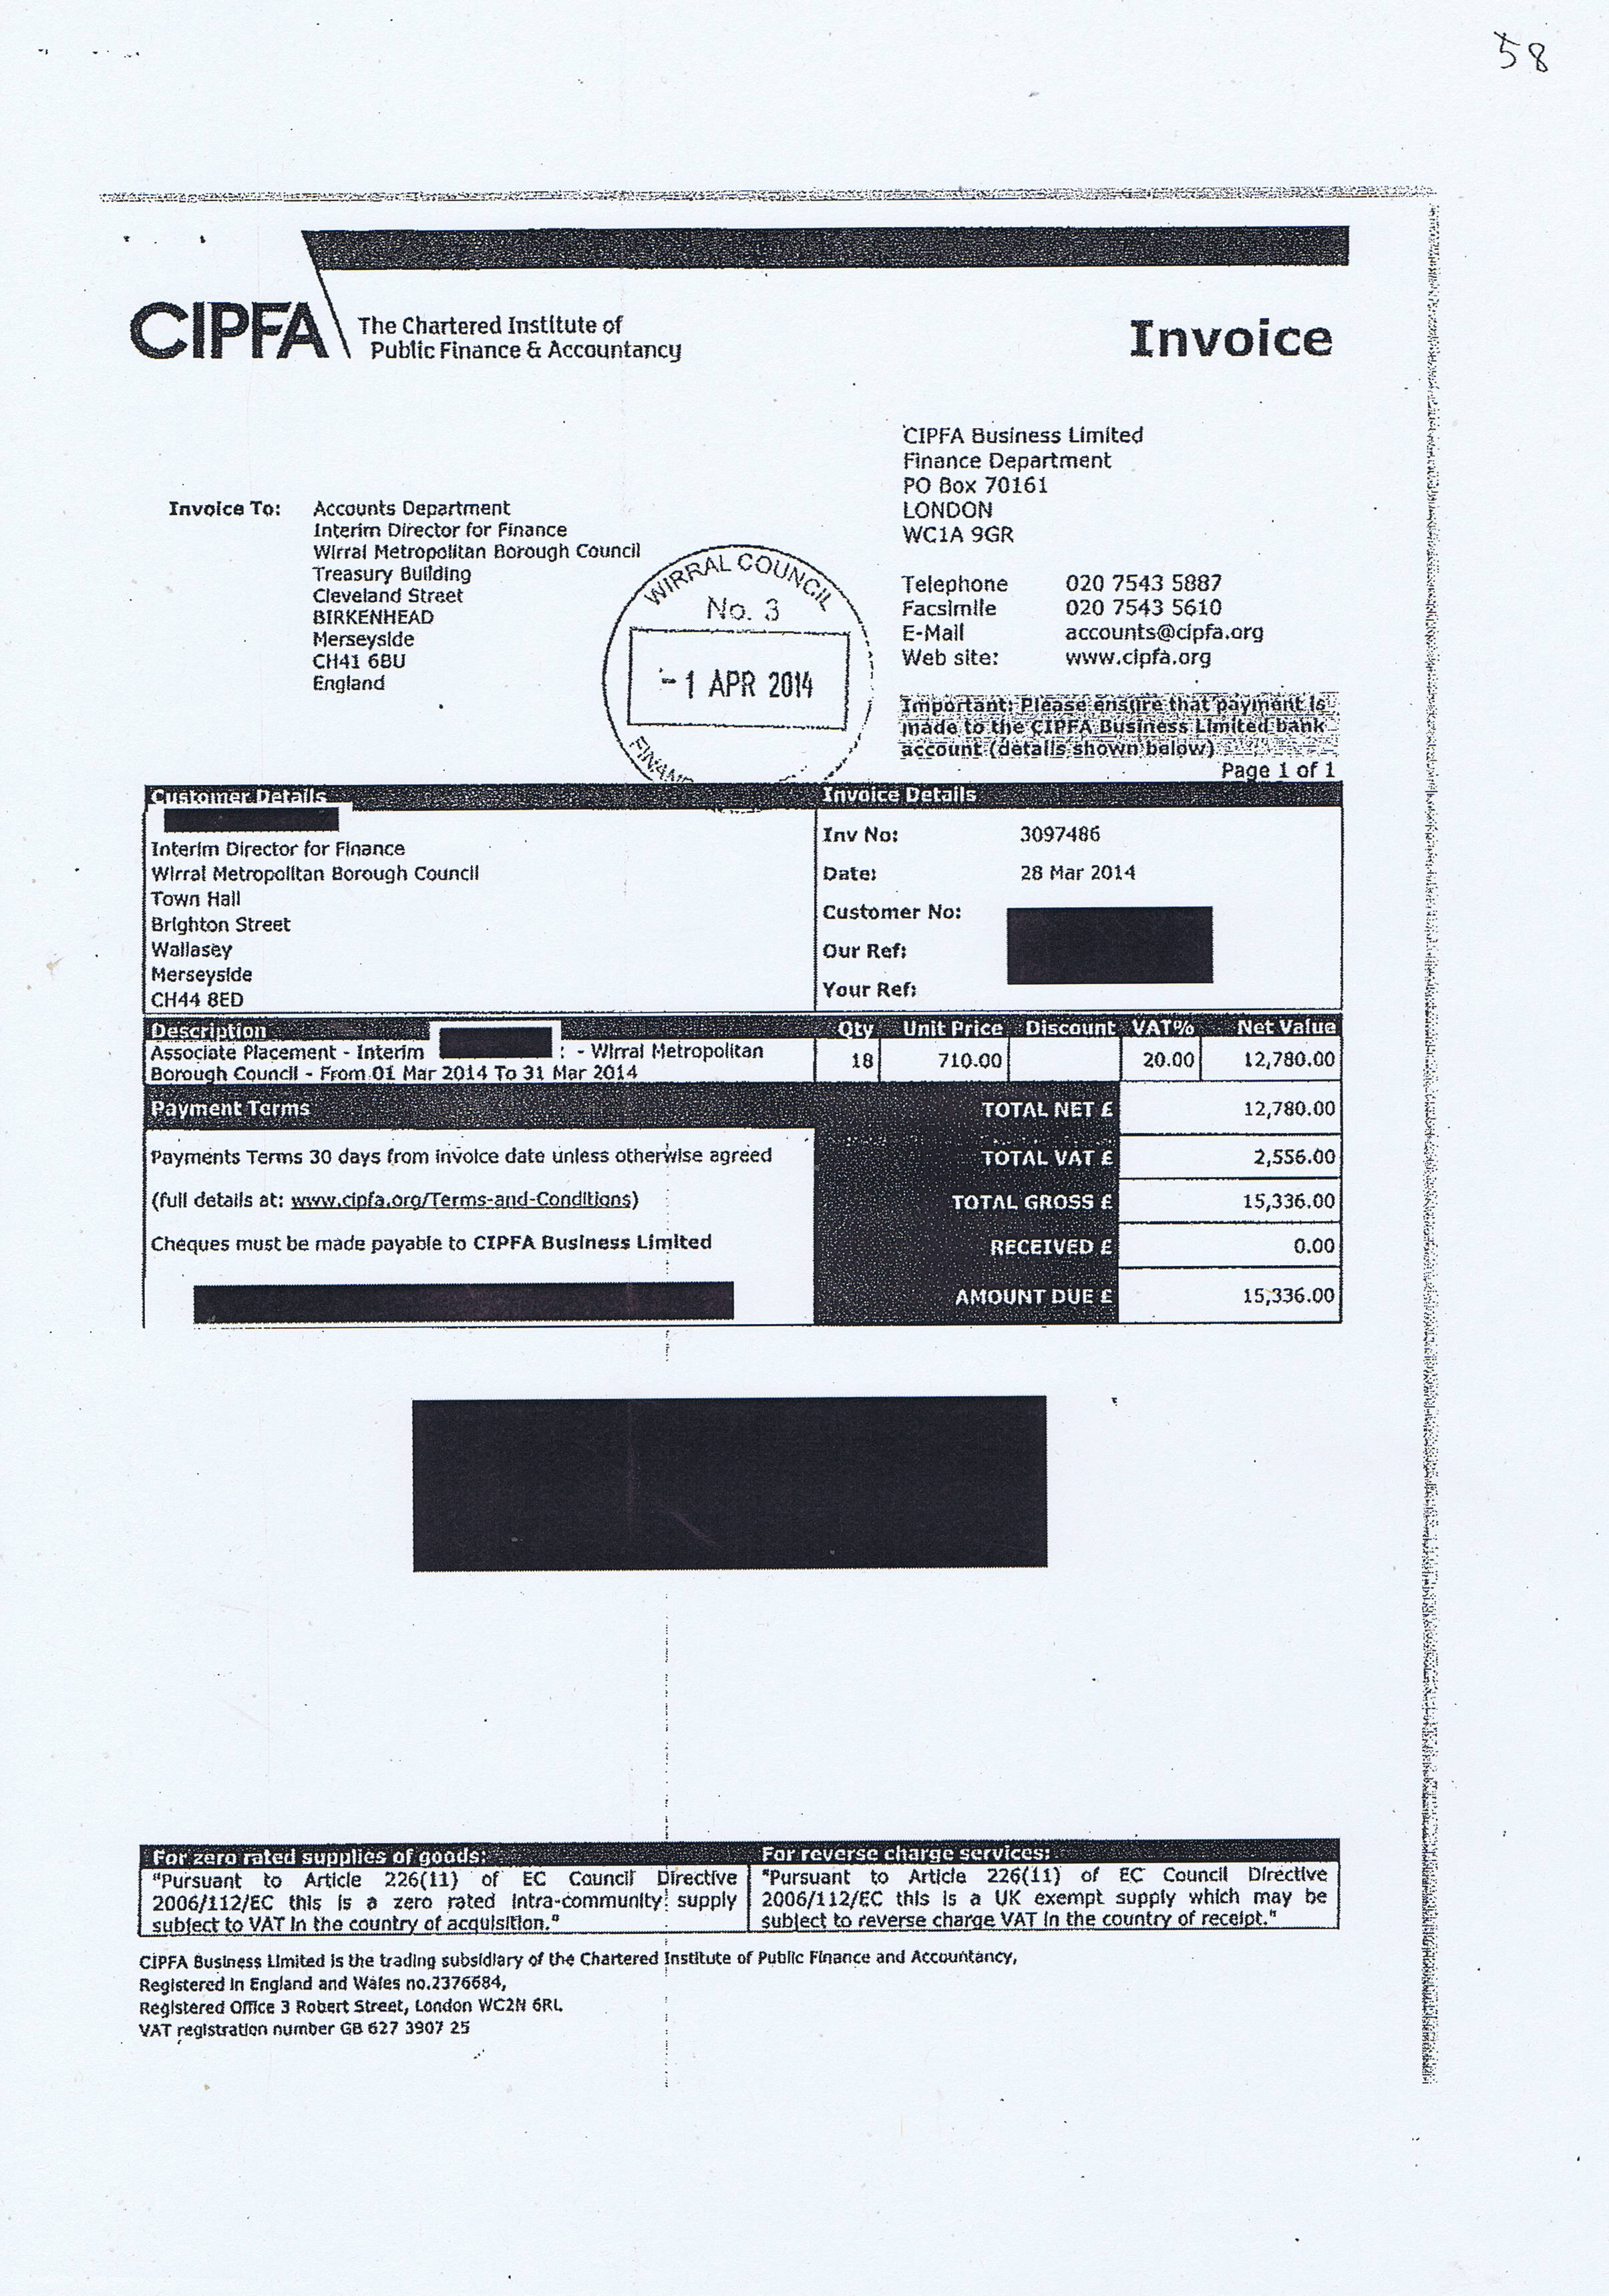 Wirral Council invoice 58 The Chartered Institute of Public Finance & Accountancy CIPFA £15336